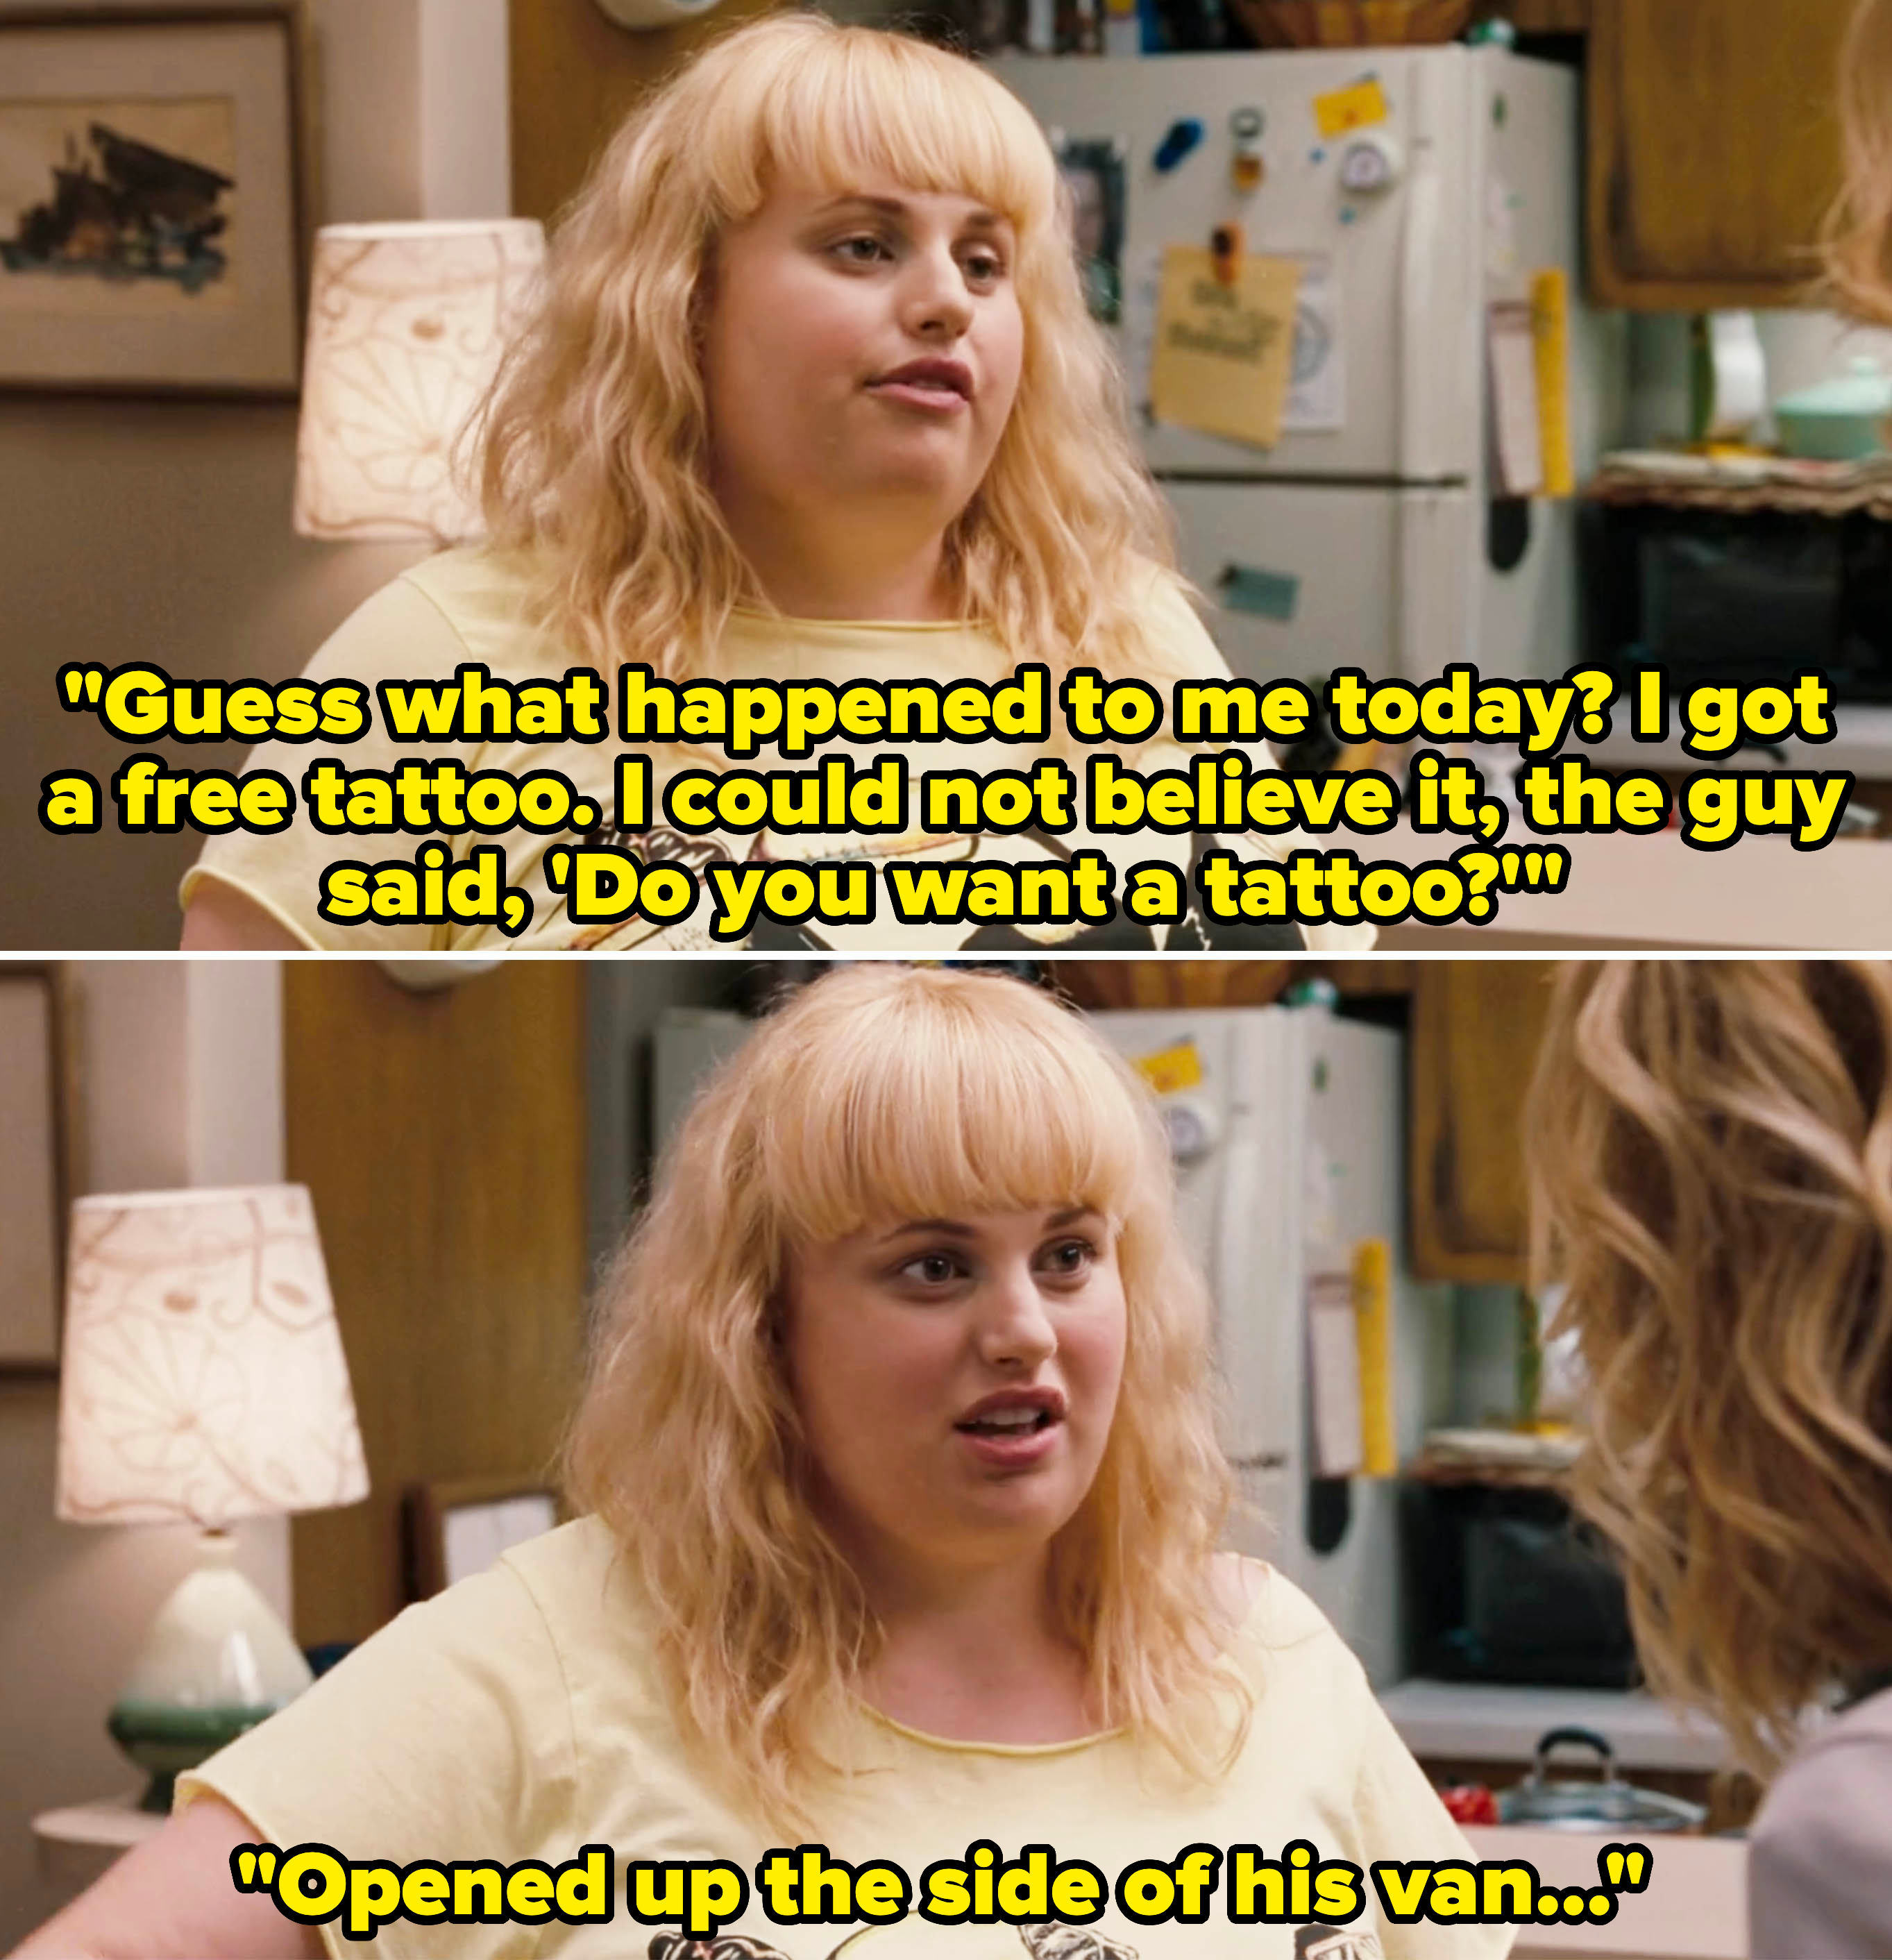 Brynn in Bridesmaids talking about the free tattoo she got